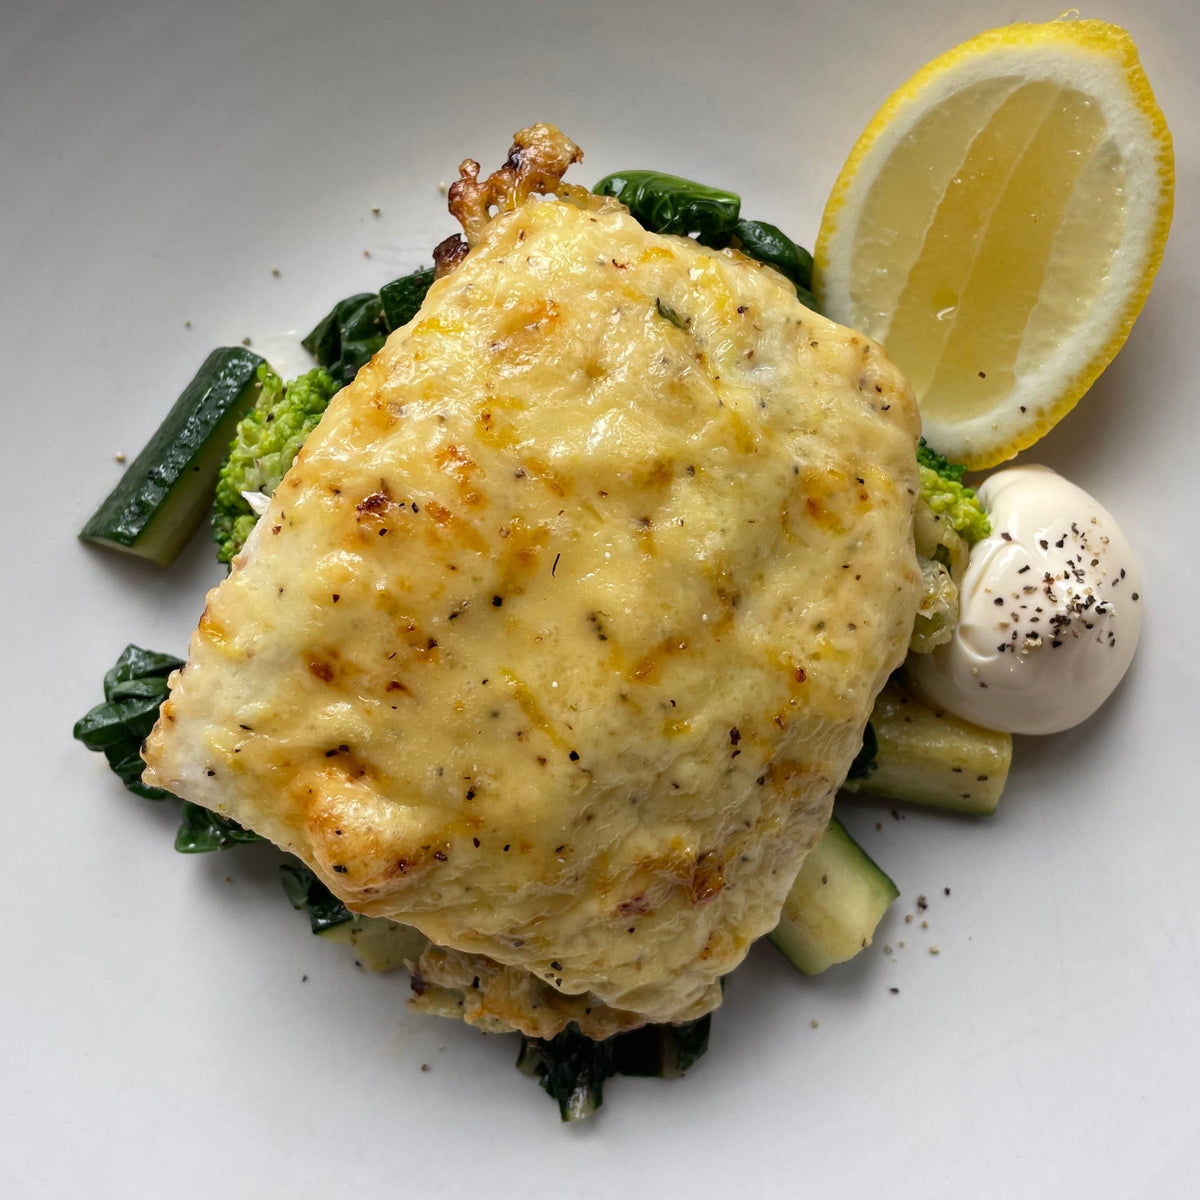 Parmesan Crusted Fish with Wilted Greens